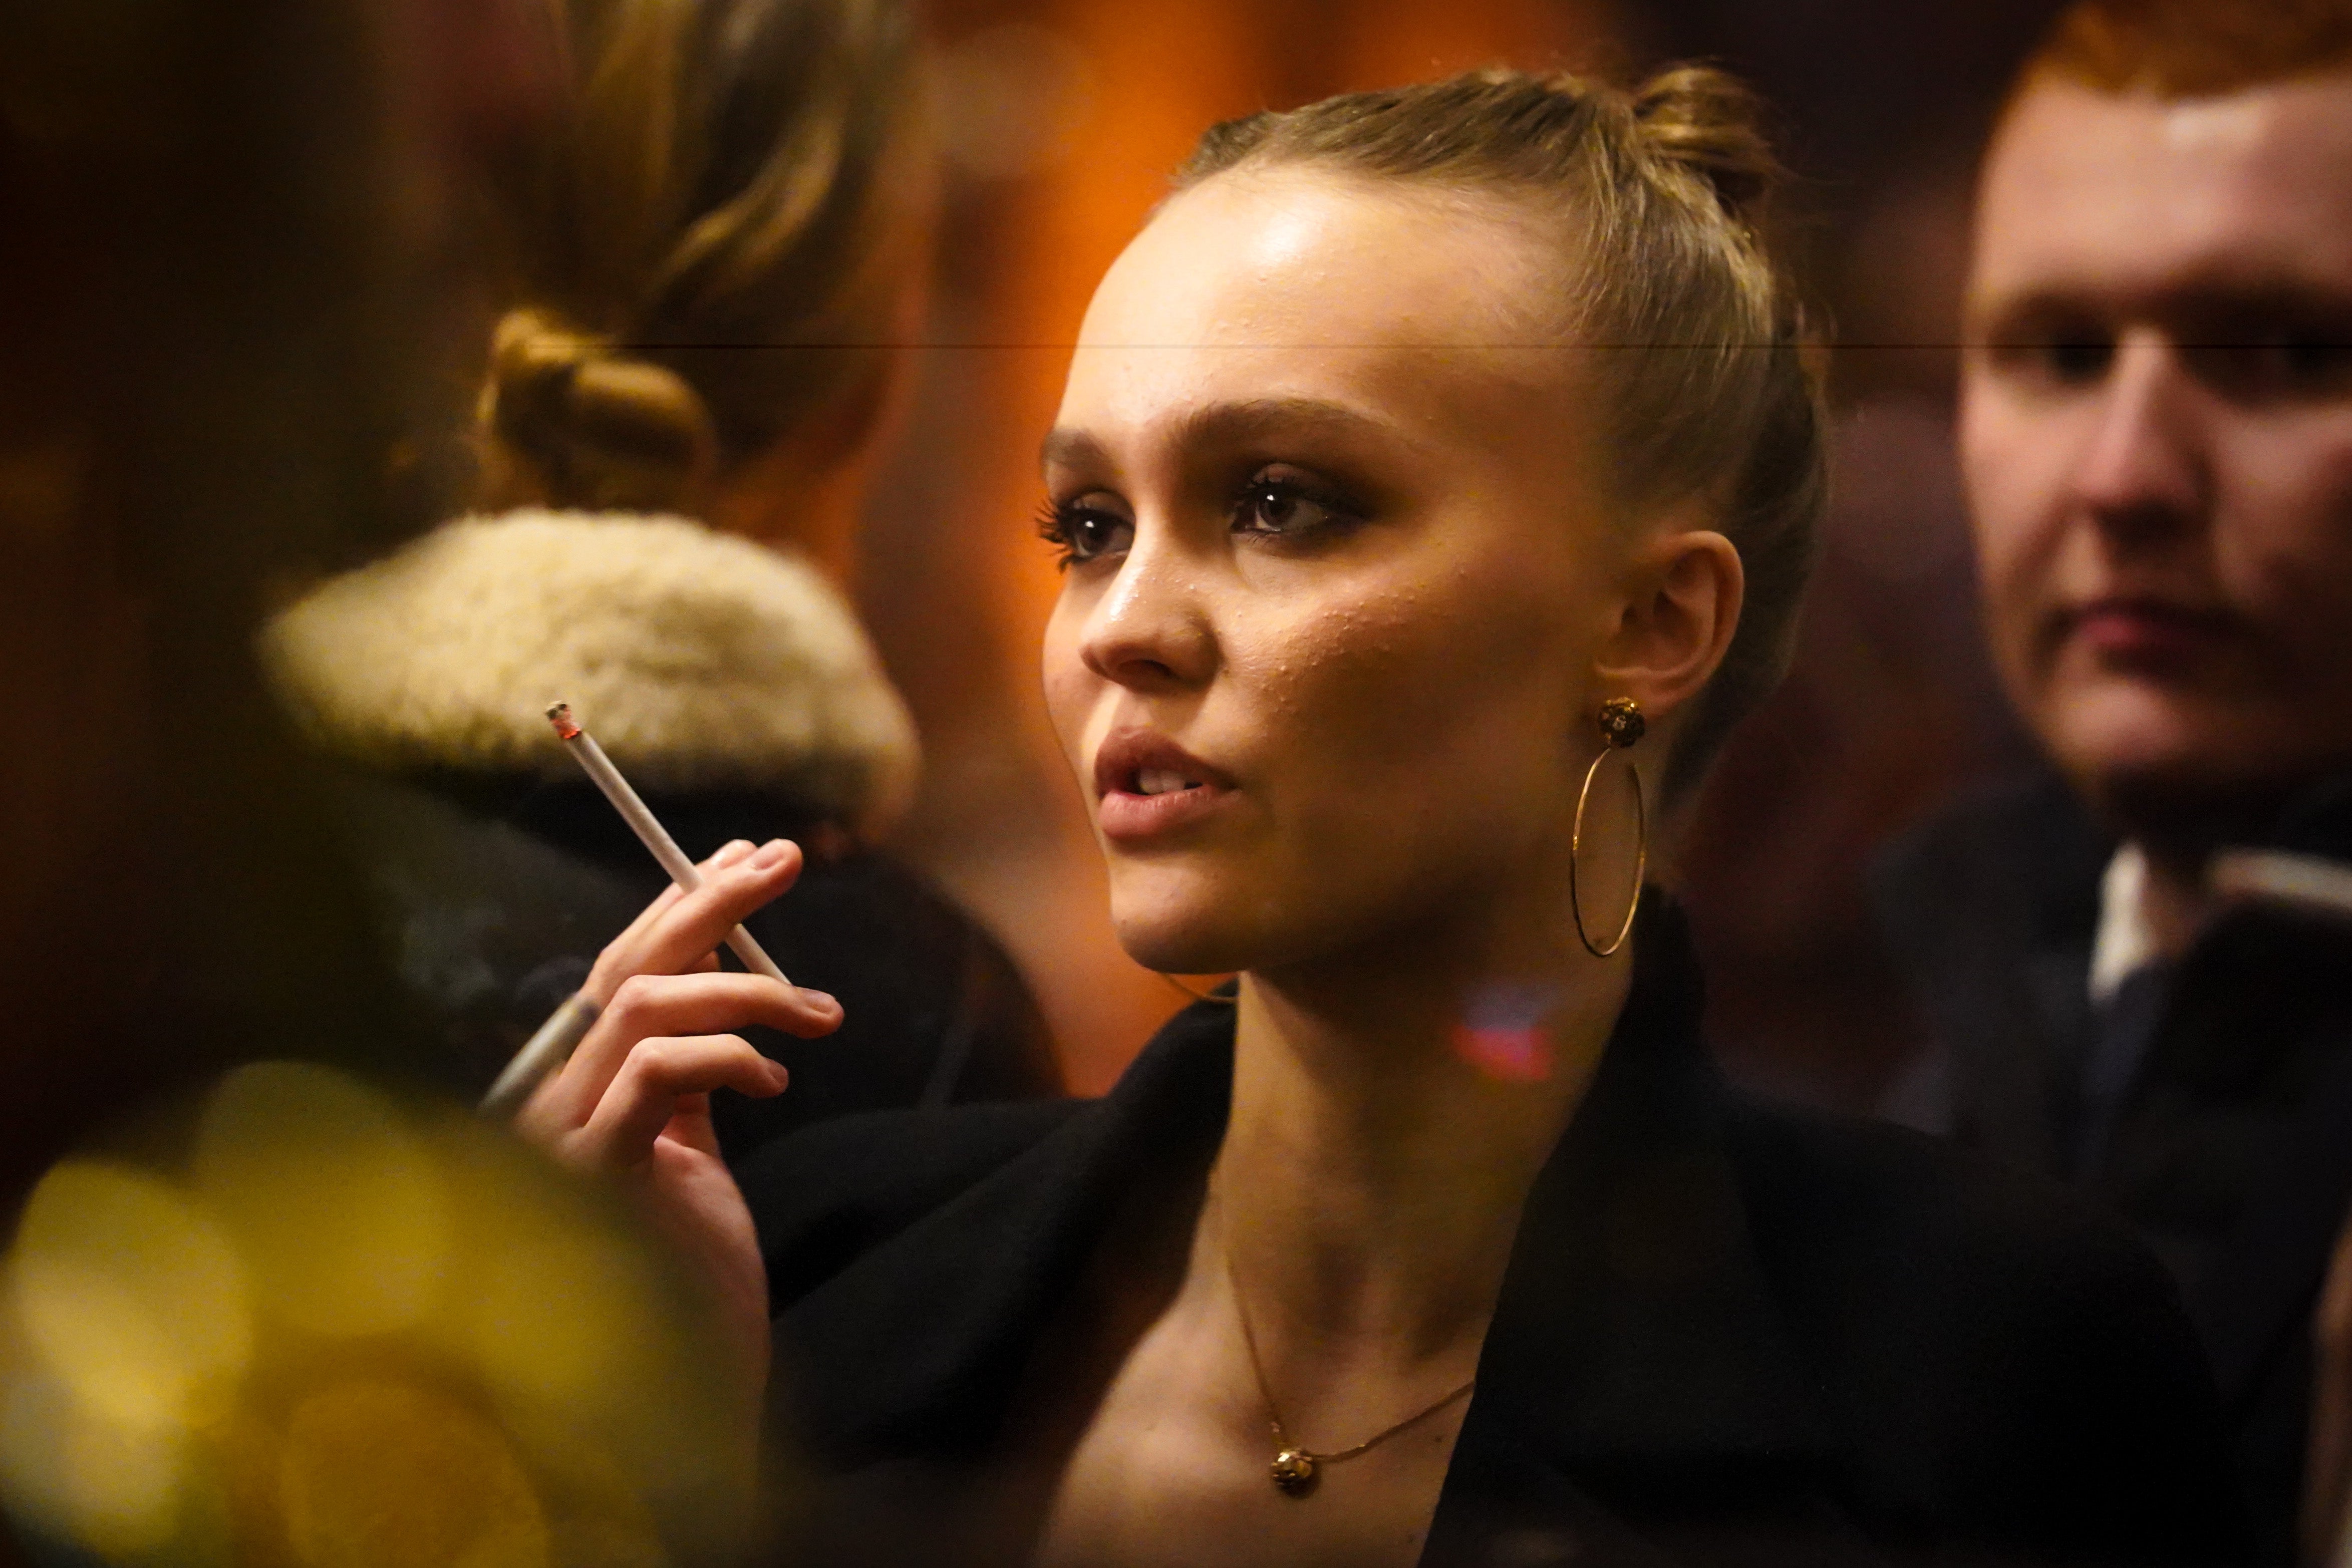 Lily-Rose Depp’s choice of cigarettes over vapes is becoming more typical of Generation Z